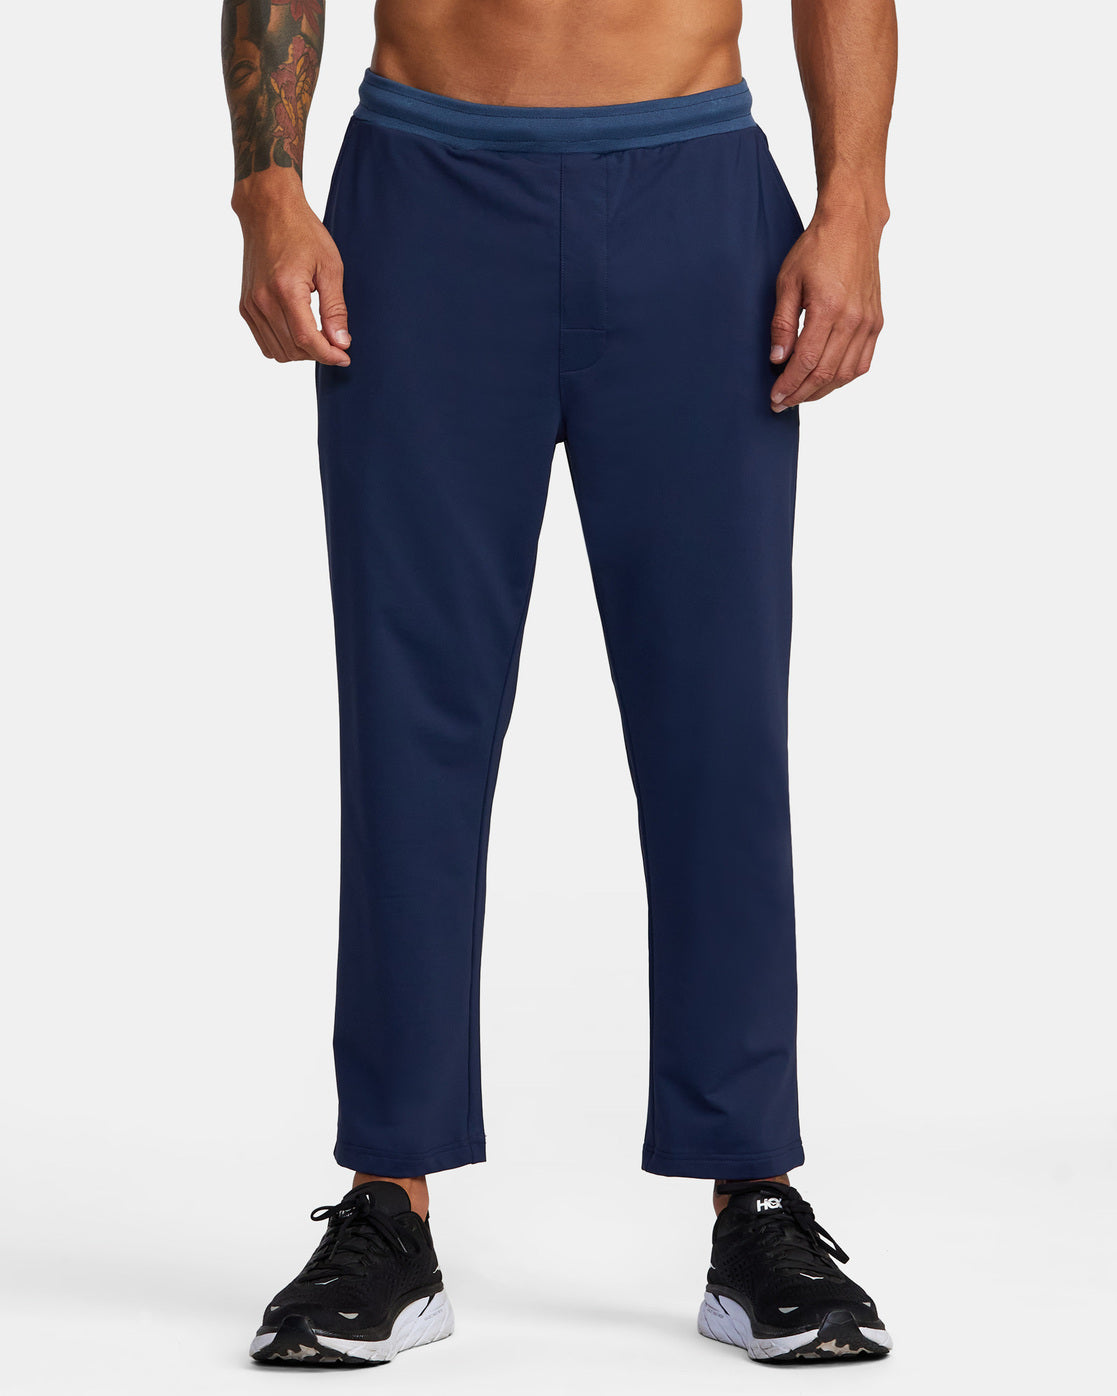 Trainer Sweatpants - Army Blue